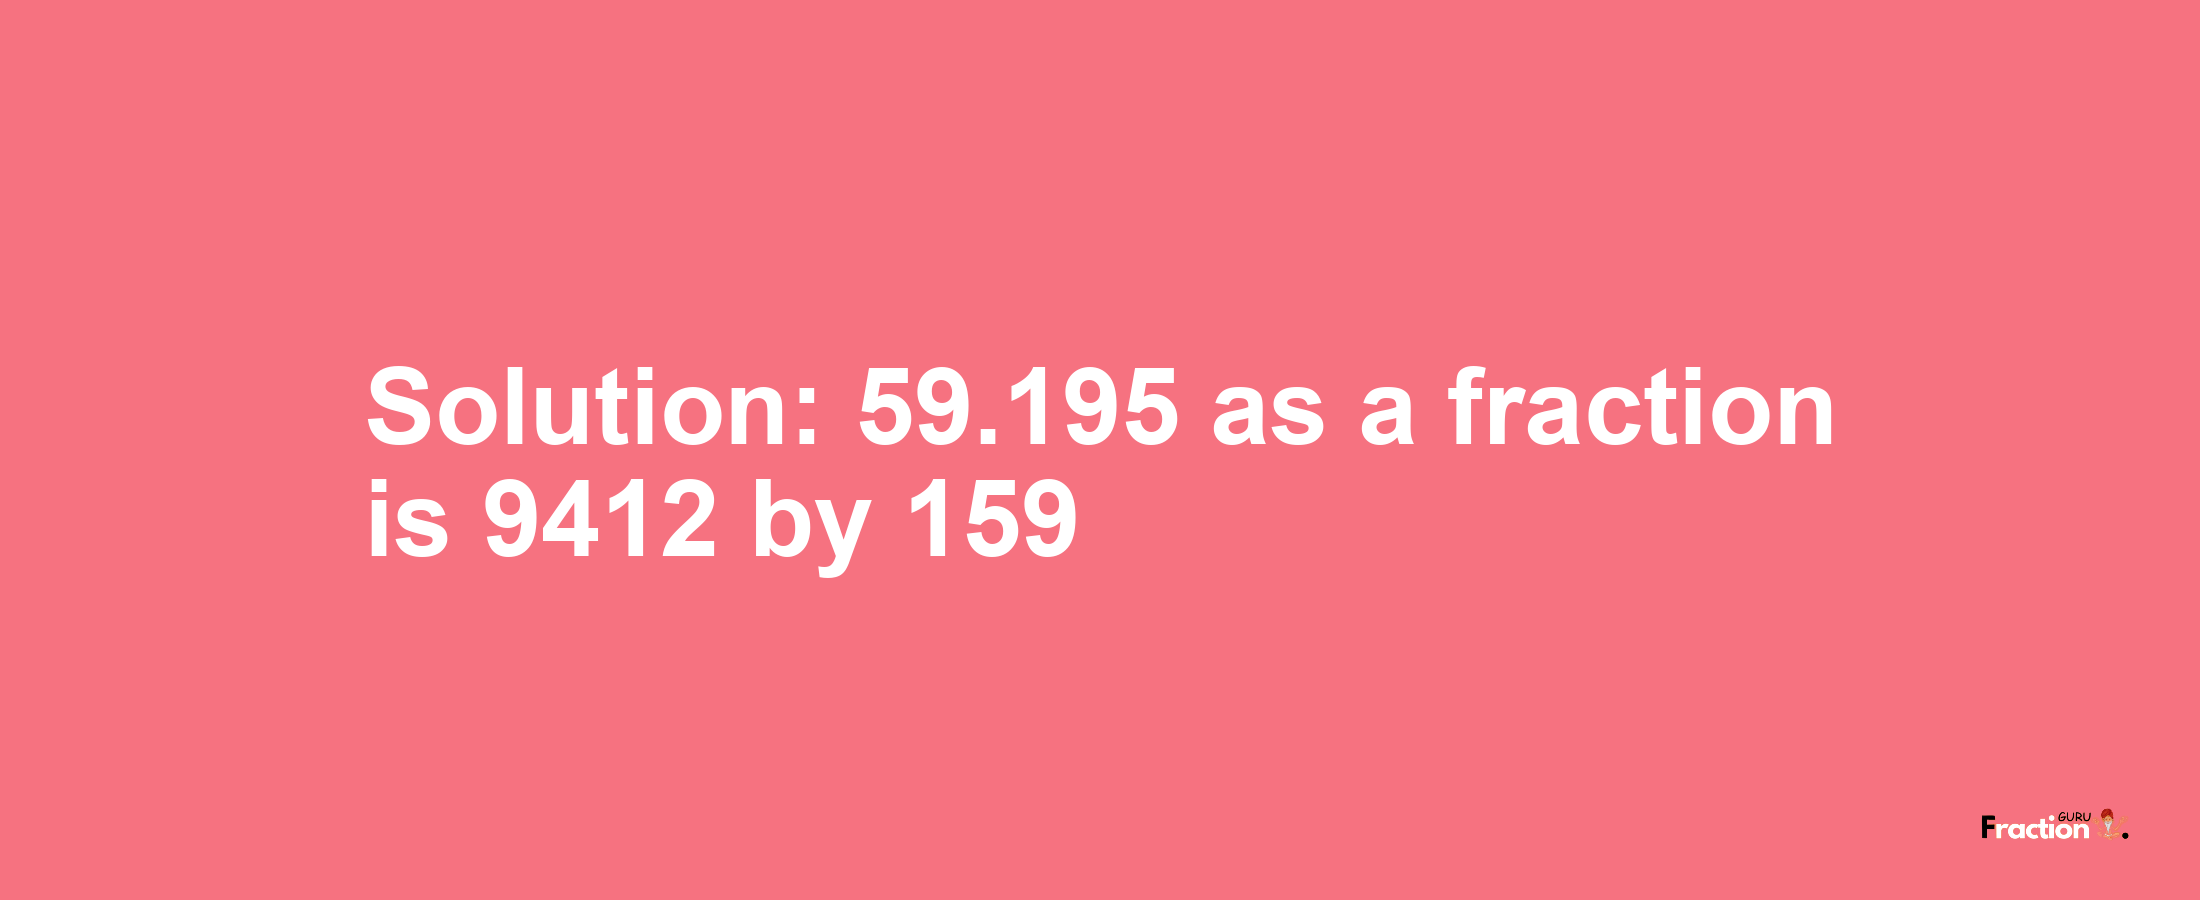 Solution:59.195 as a fraction is 9412/159